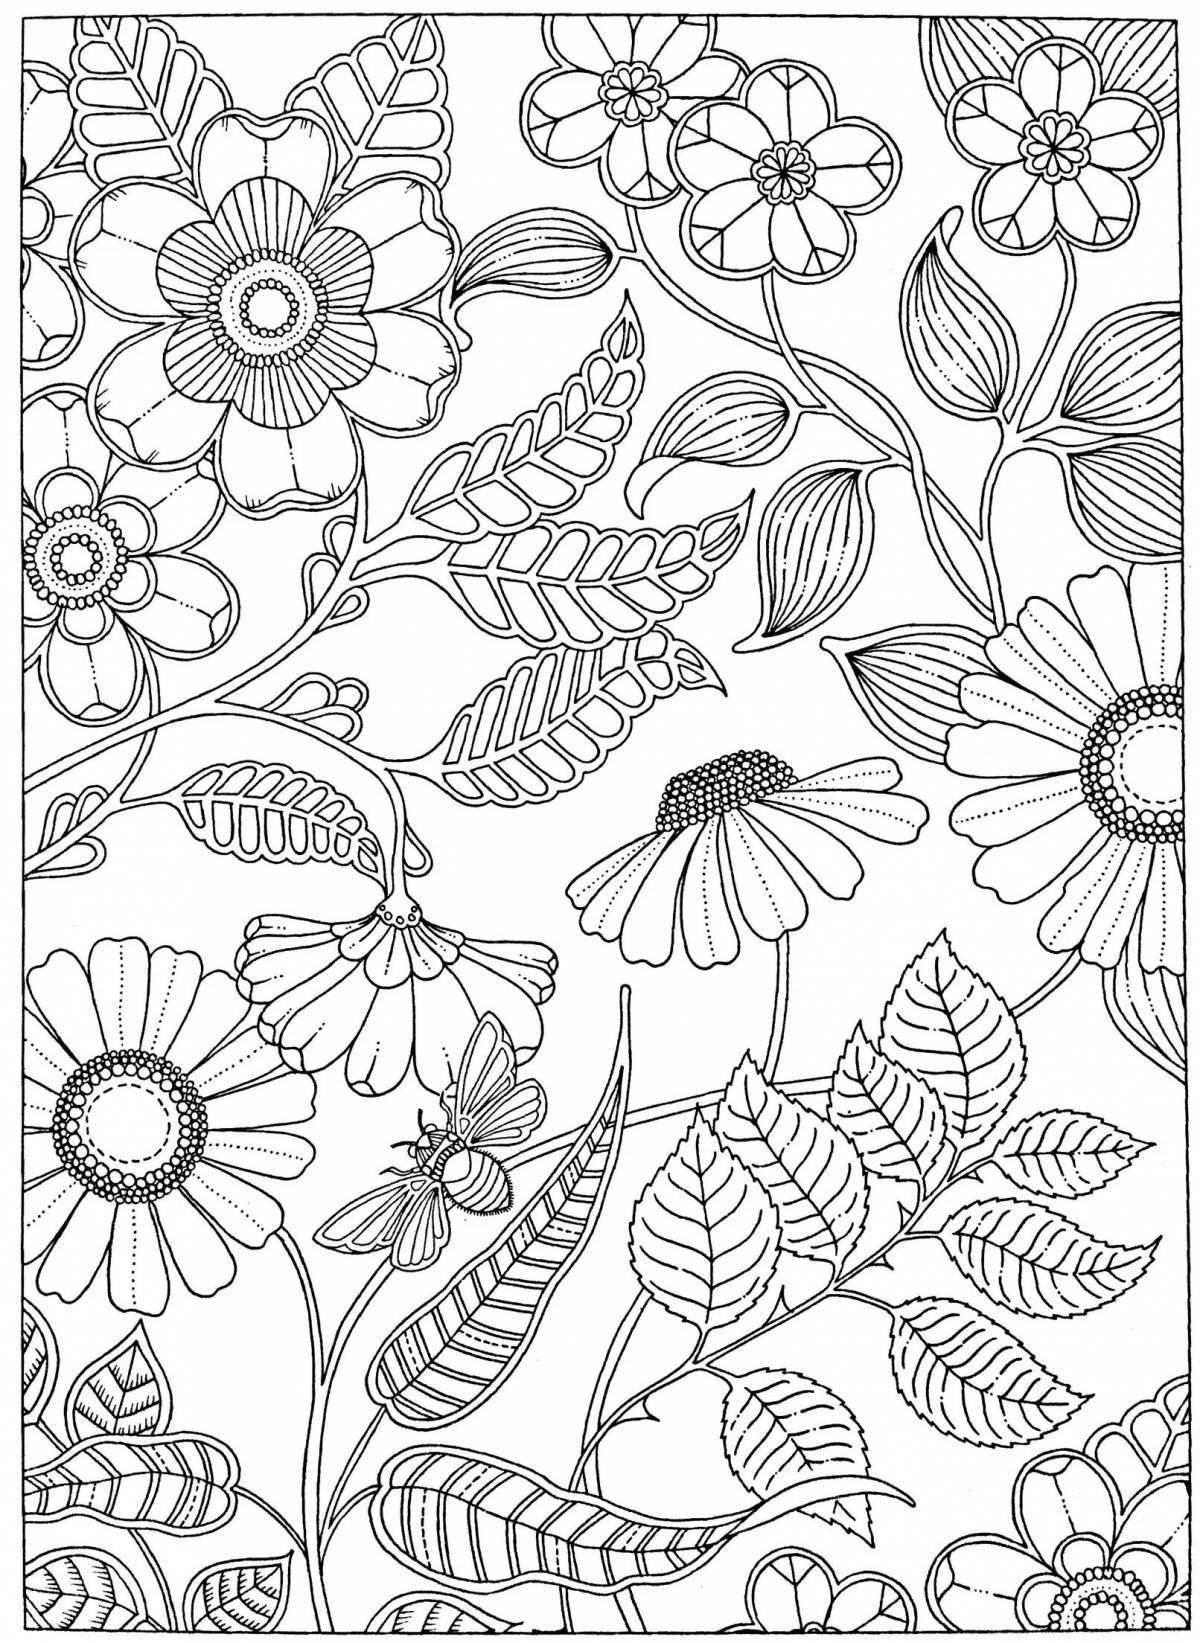 Coloring page charming flower garden